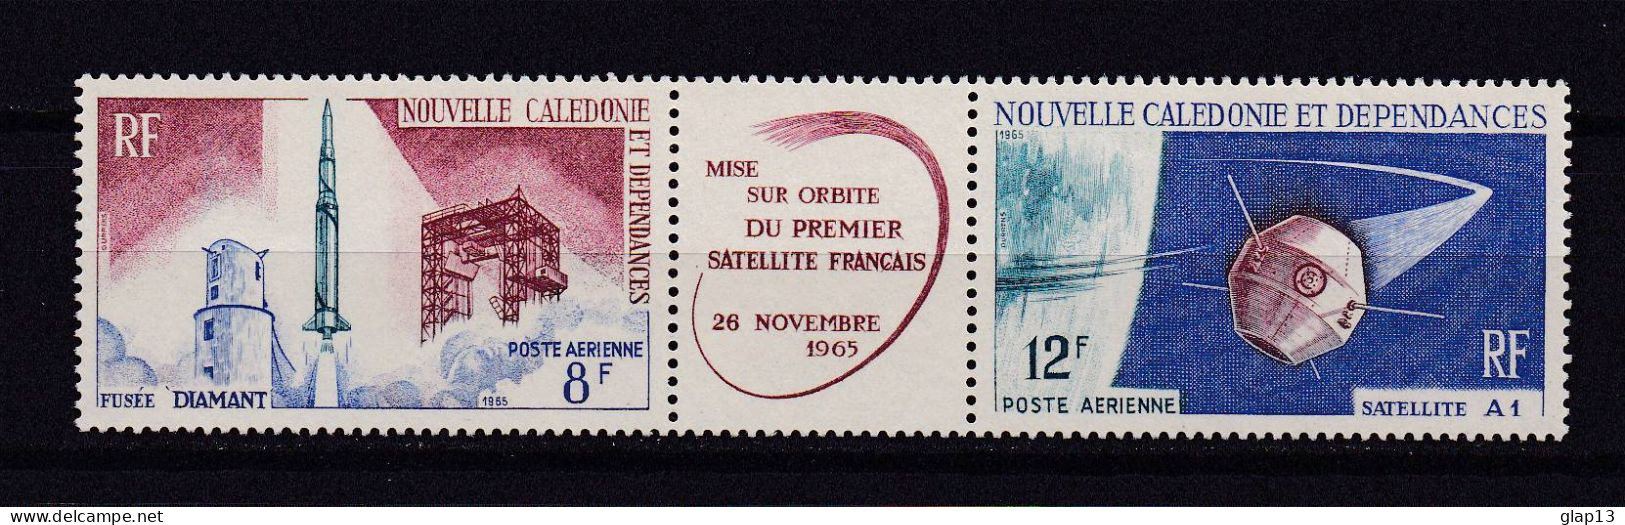 NOUVELLE-CALEDONIE 1966 PA N°85A NEUF AVEC CHARNIERE SATELLITE - Nuovi